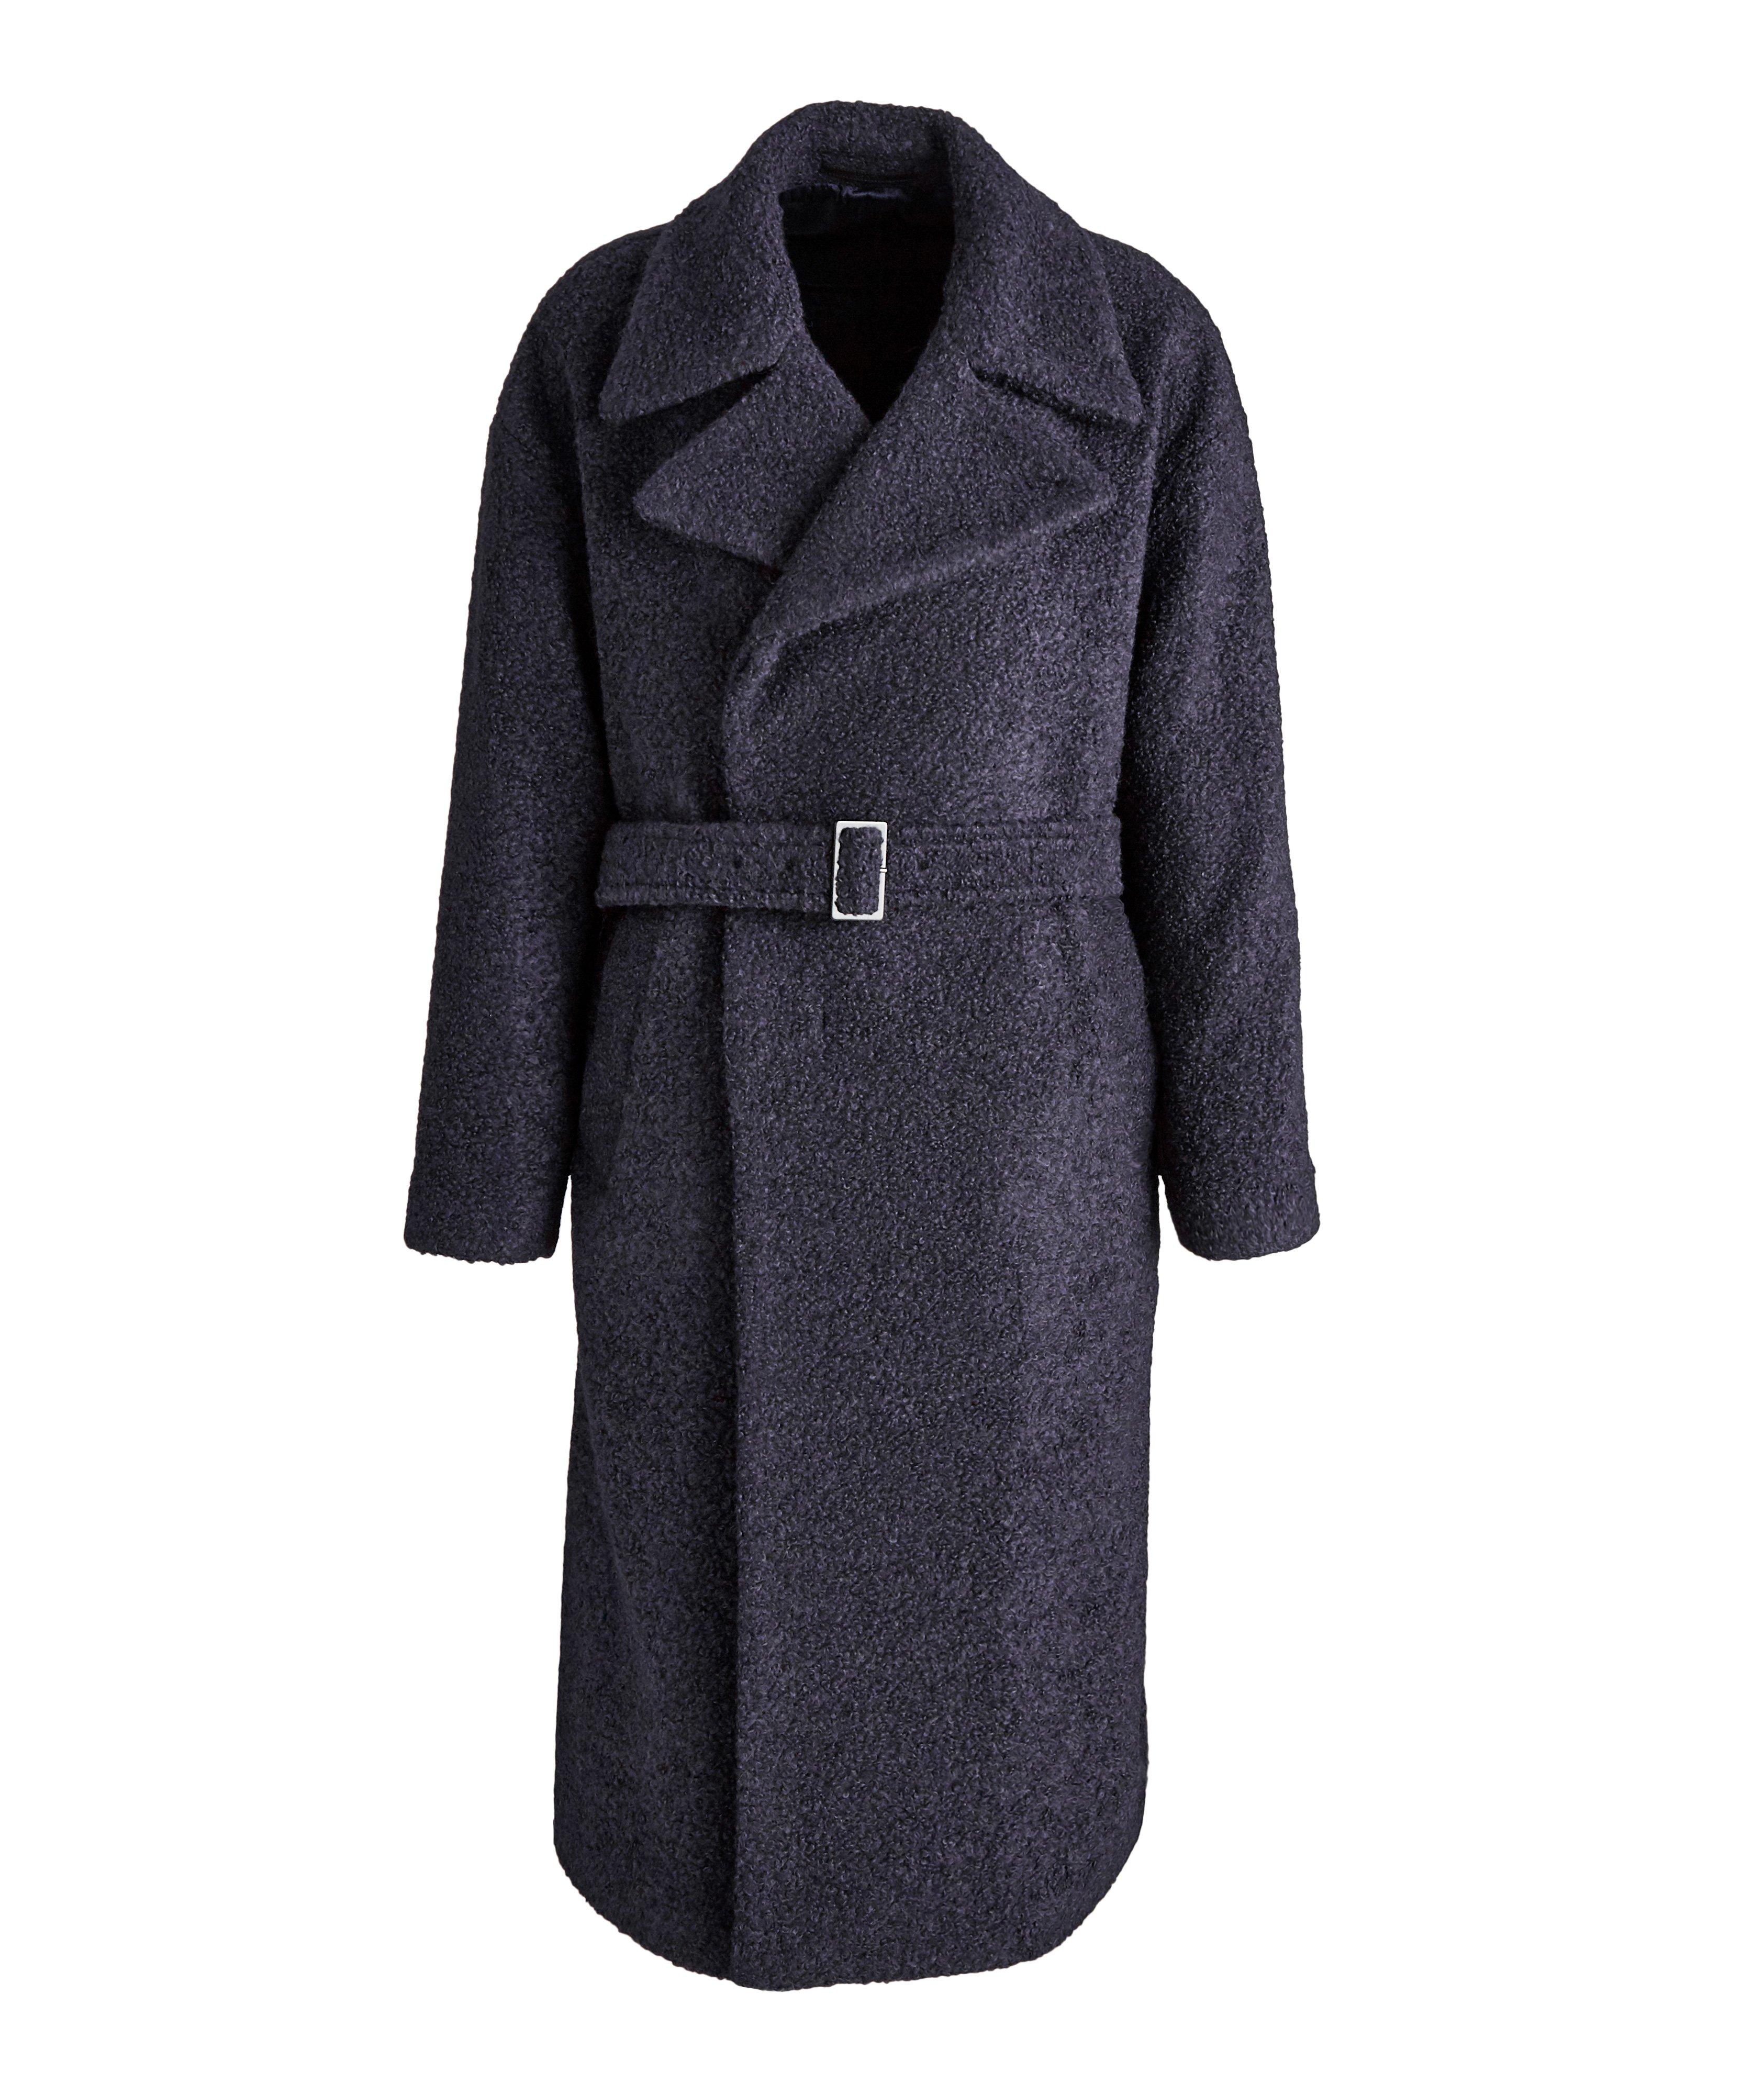 Double-Breasted Alpaca, Cashmere & Wool Trench Coat image 0